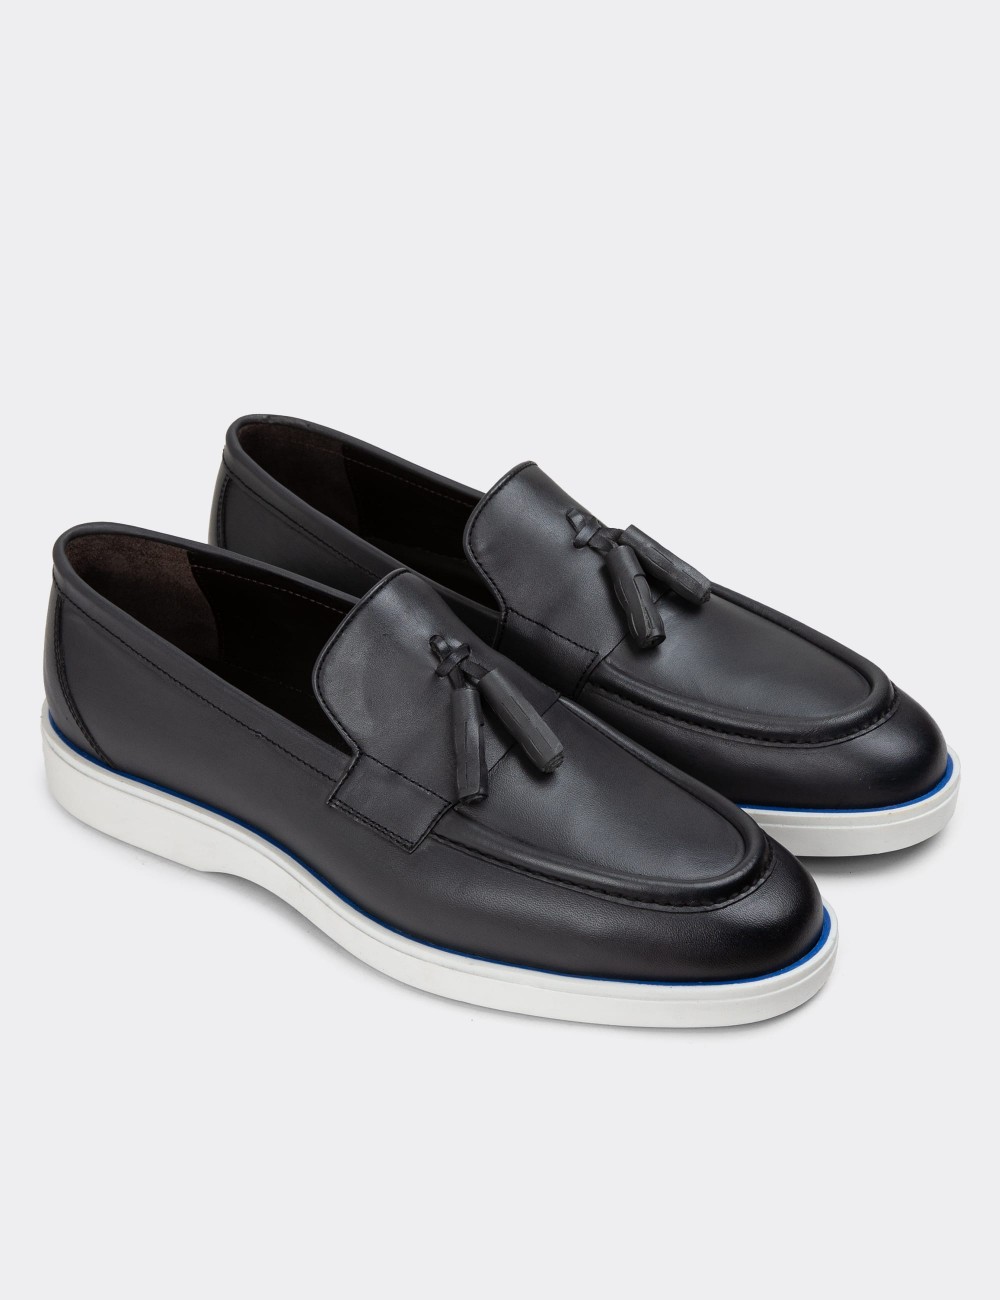 Gray Leather Loafers - 01958MGRIC01